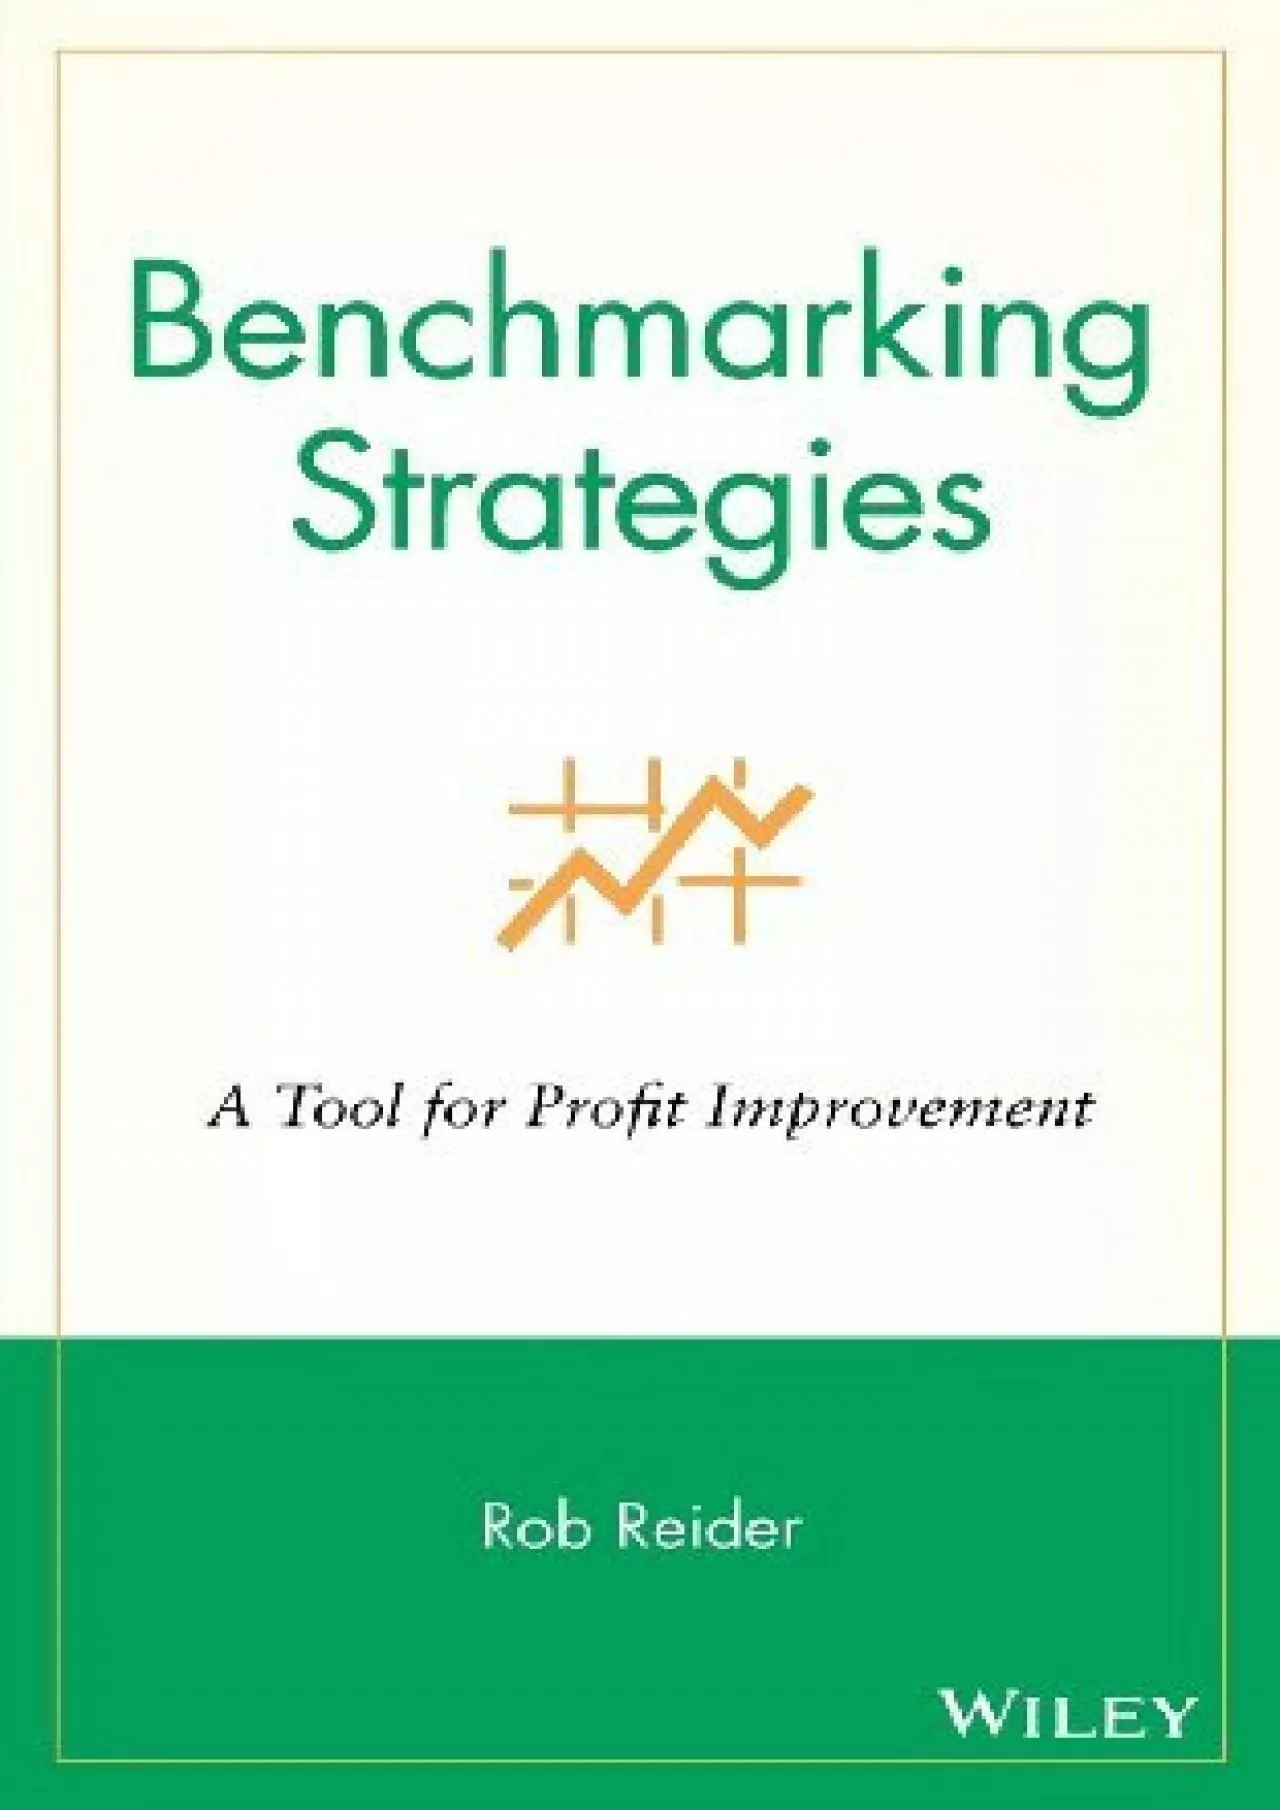 Benchmarking Strategies: A Tool for Profit Improvement